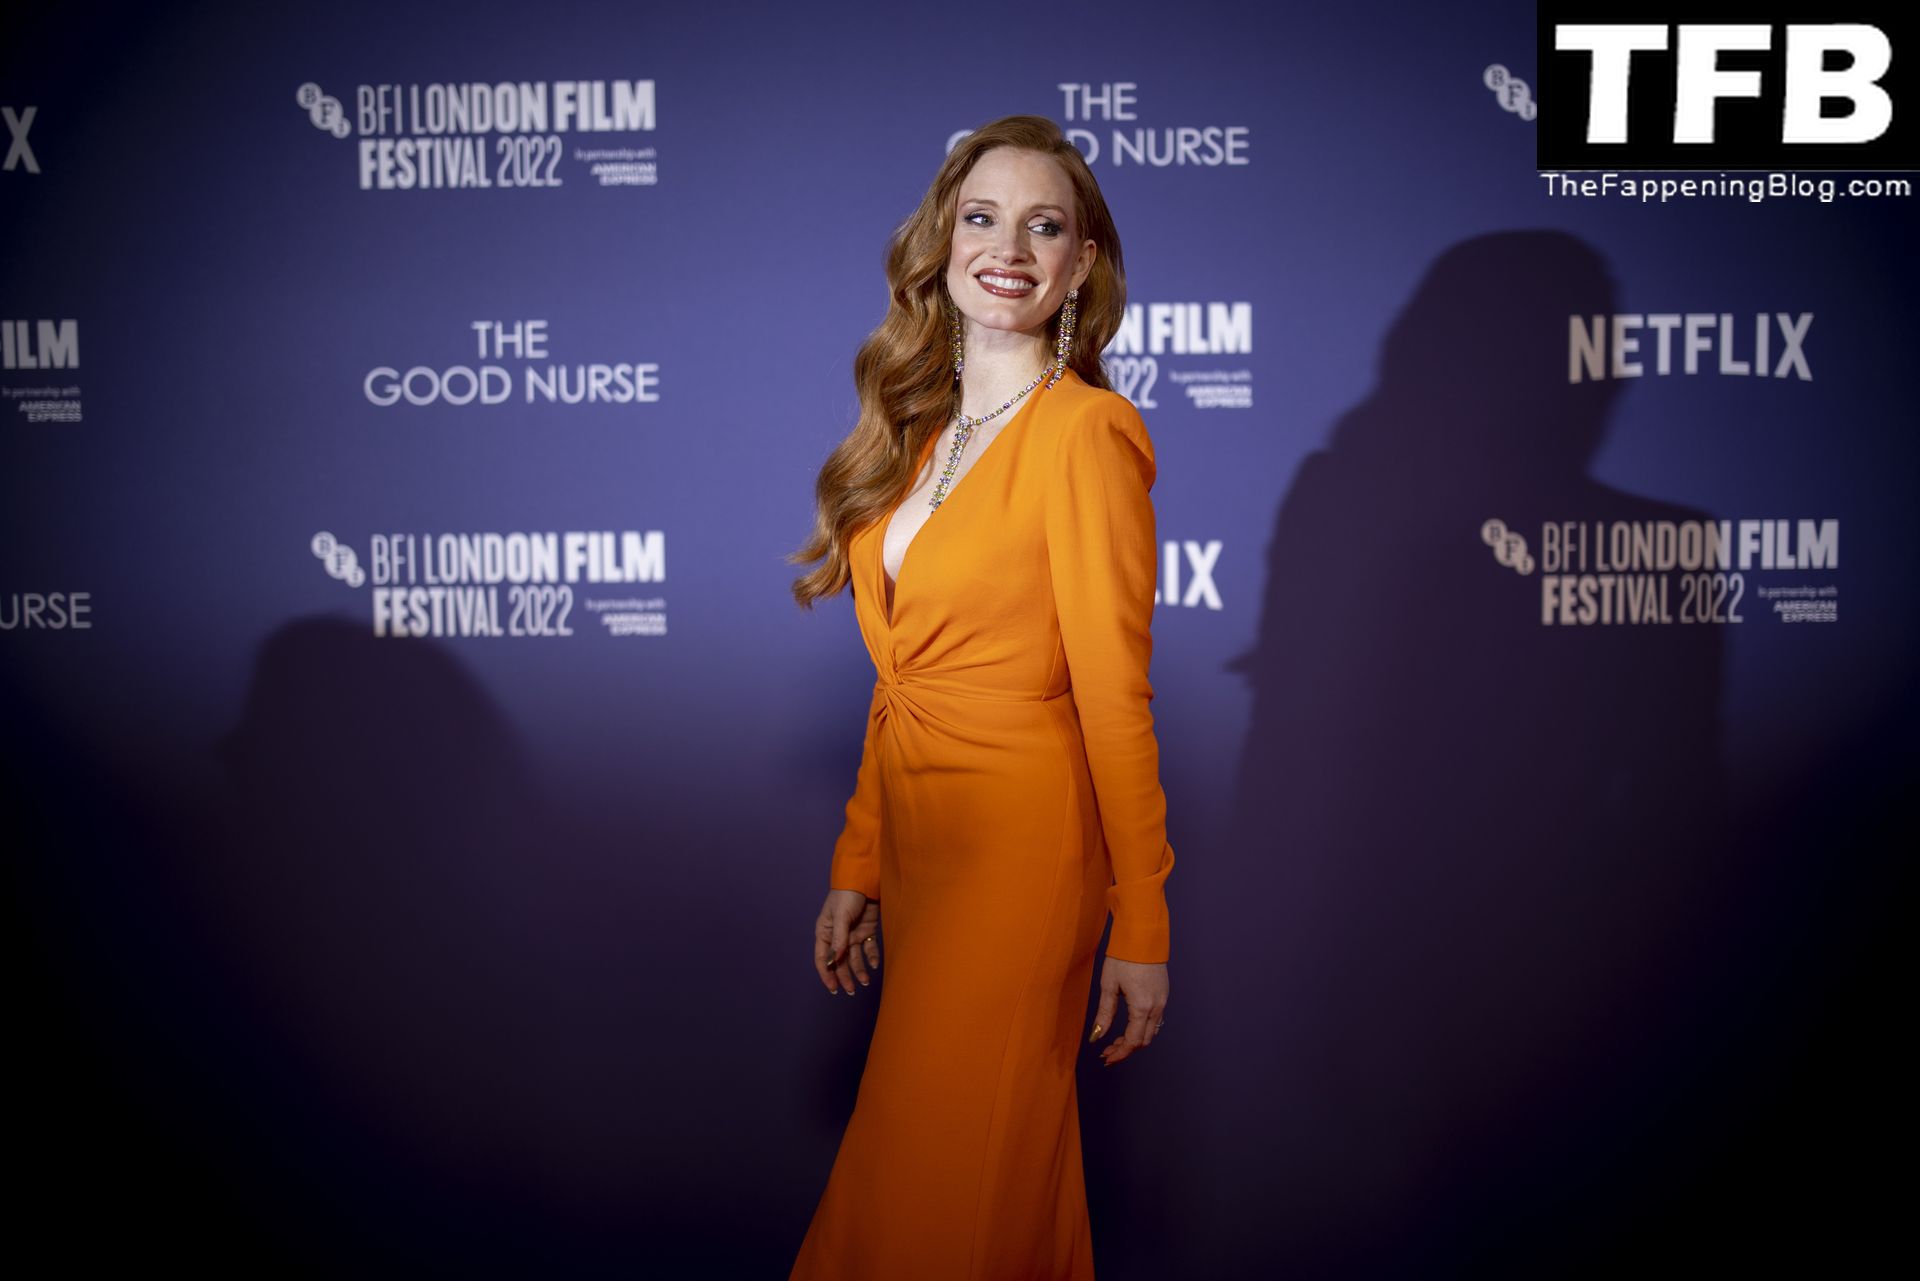 Jessica Chastain Sexy The Fappening Blog 120 - Jessica Chastain Poses for Photographers Upon Arrival for the Premiere of the Film “The Good Nurse” in London (150 Photos)